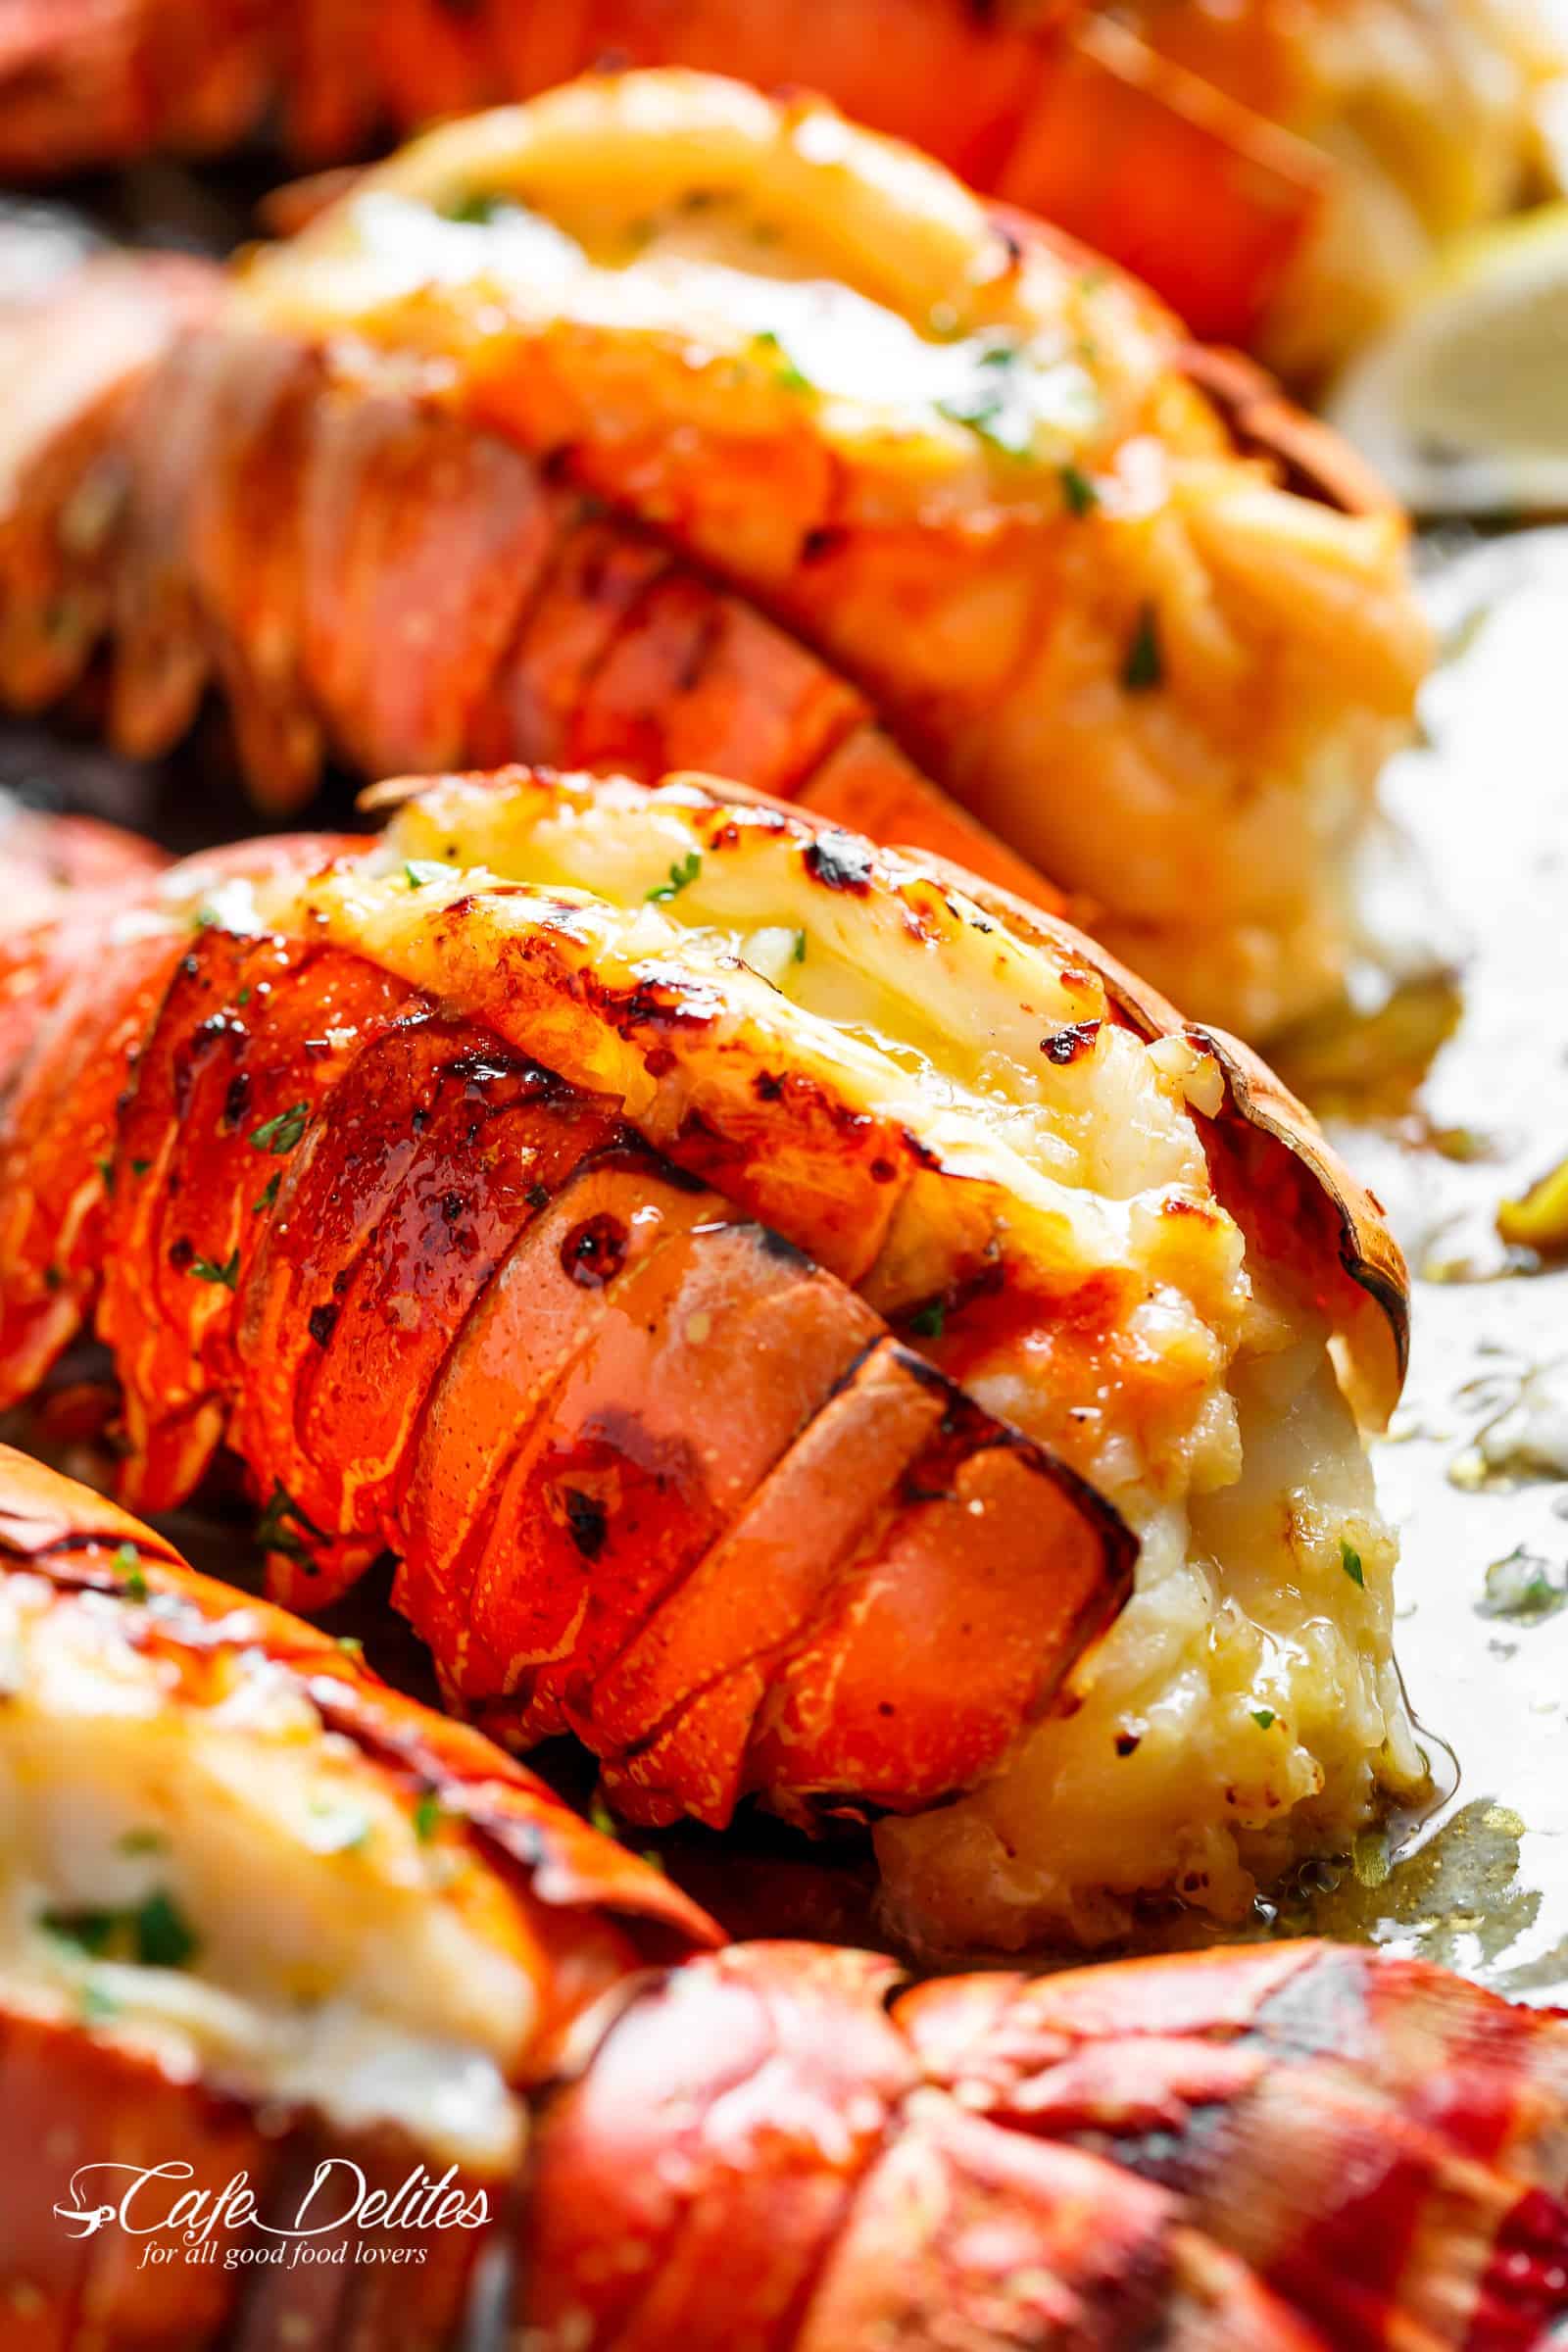 How to Cook Lobster Tails: Boil, Bake, Broil, Steam and Grill